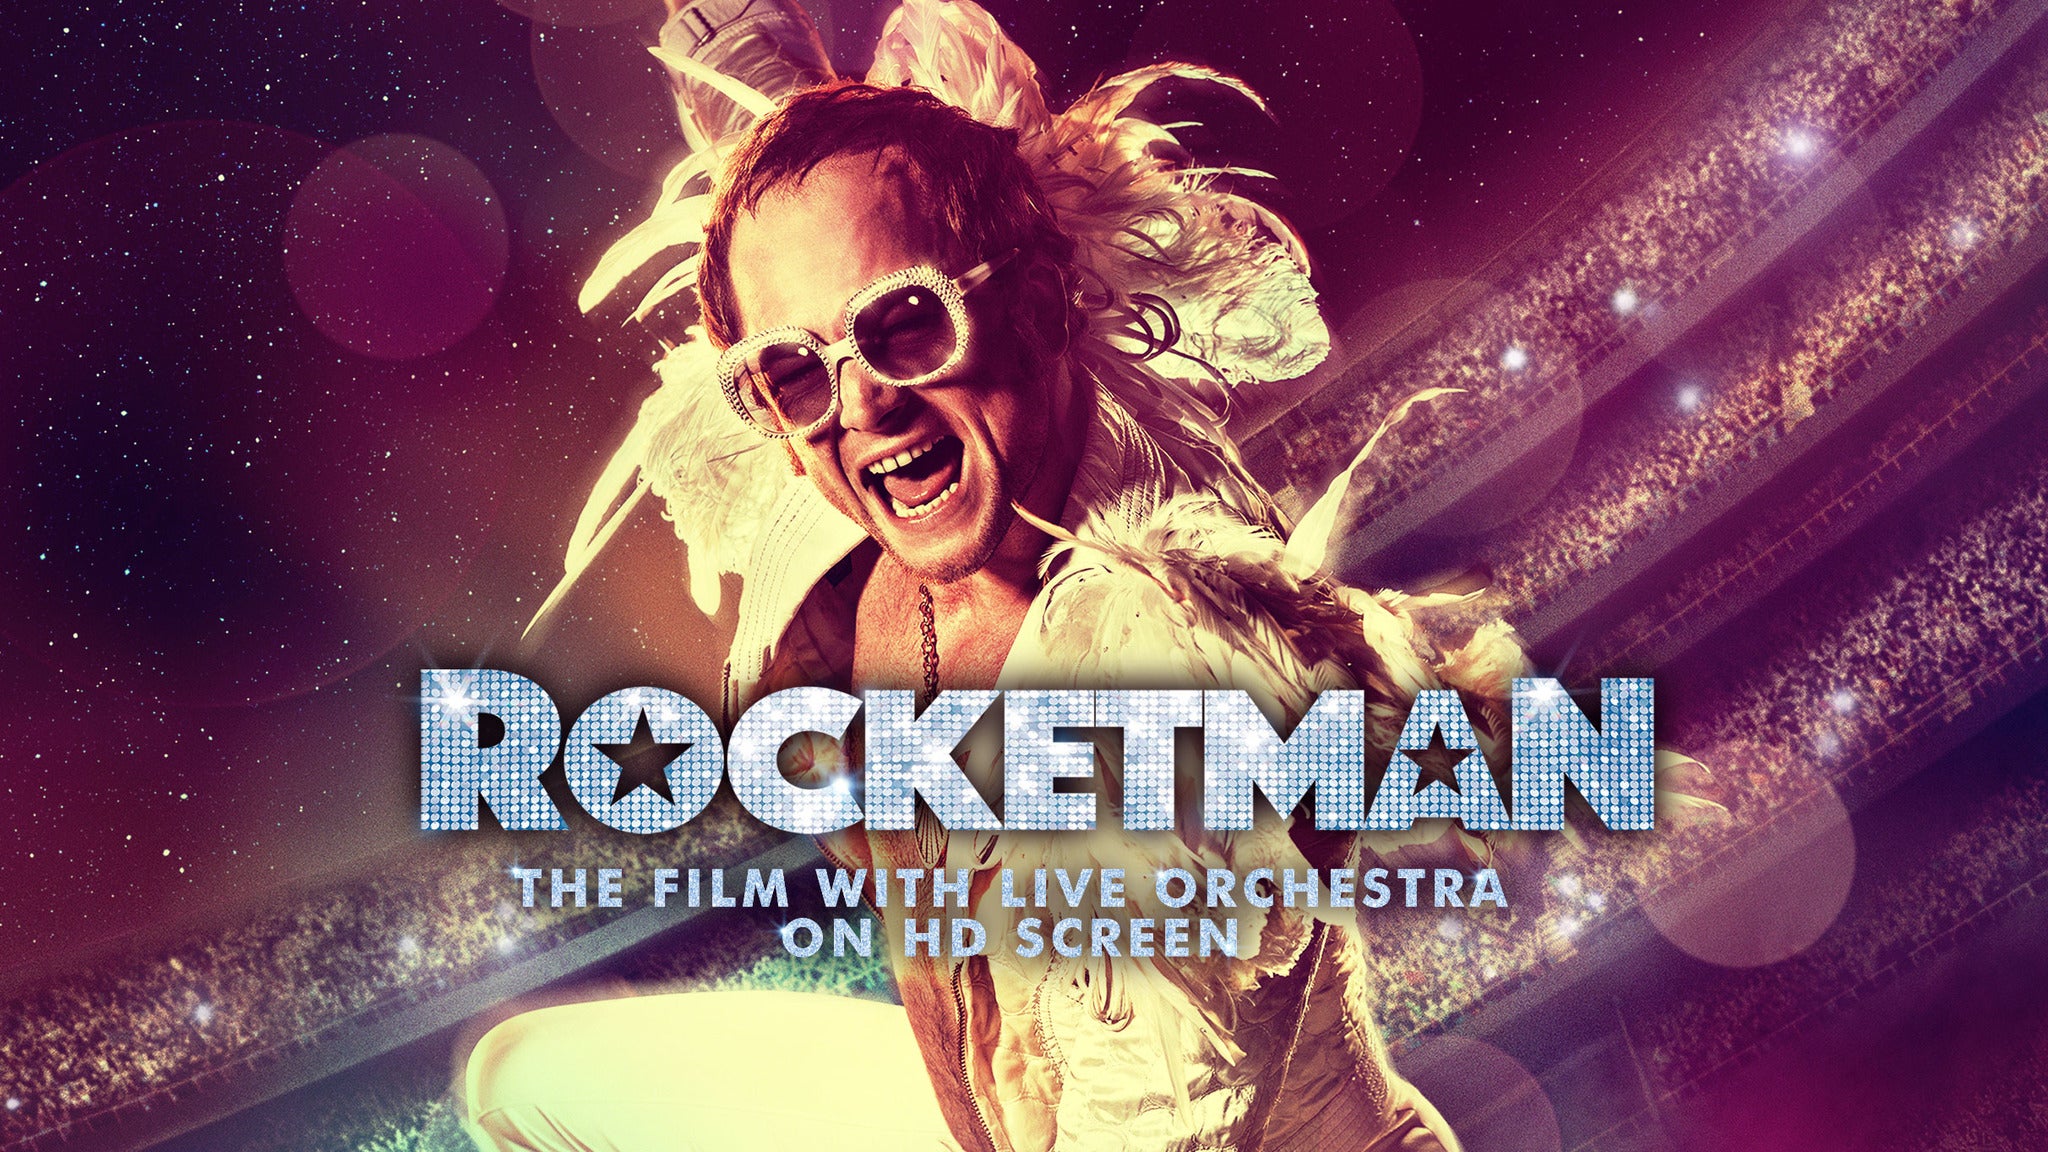 Rocketman In Concert - The Film with Live Orchestra Event Title Pic